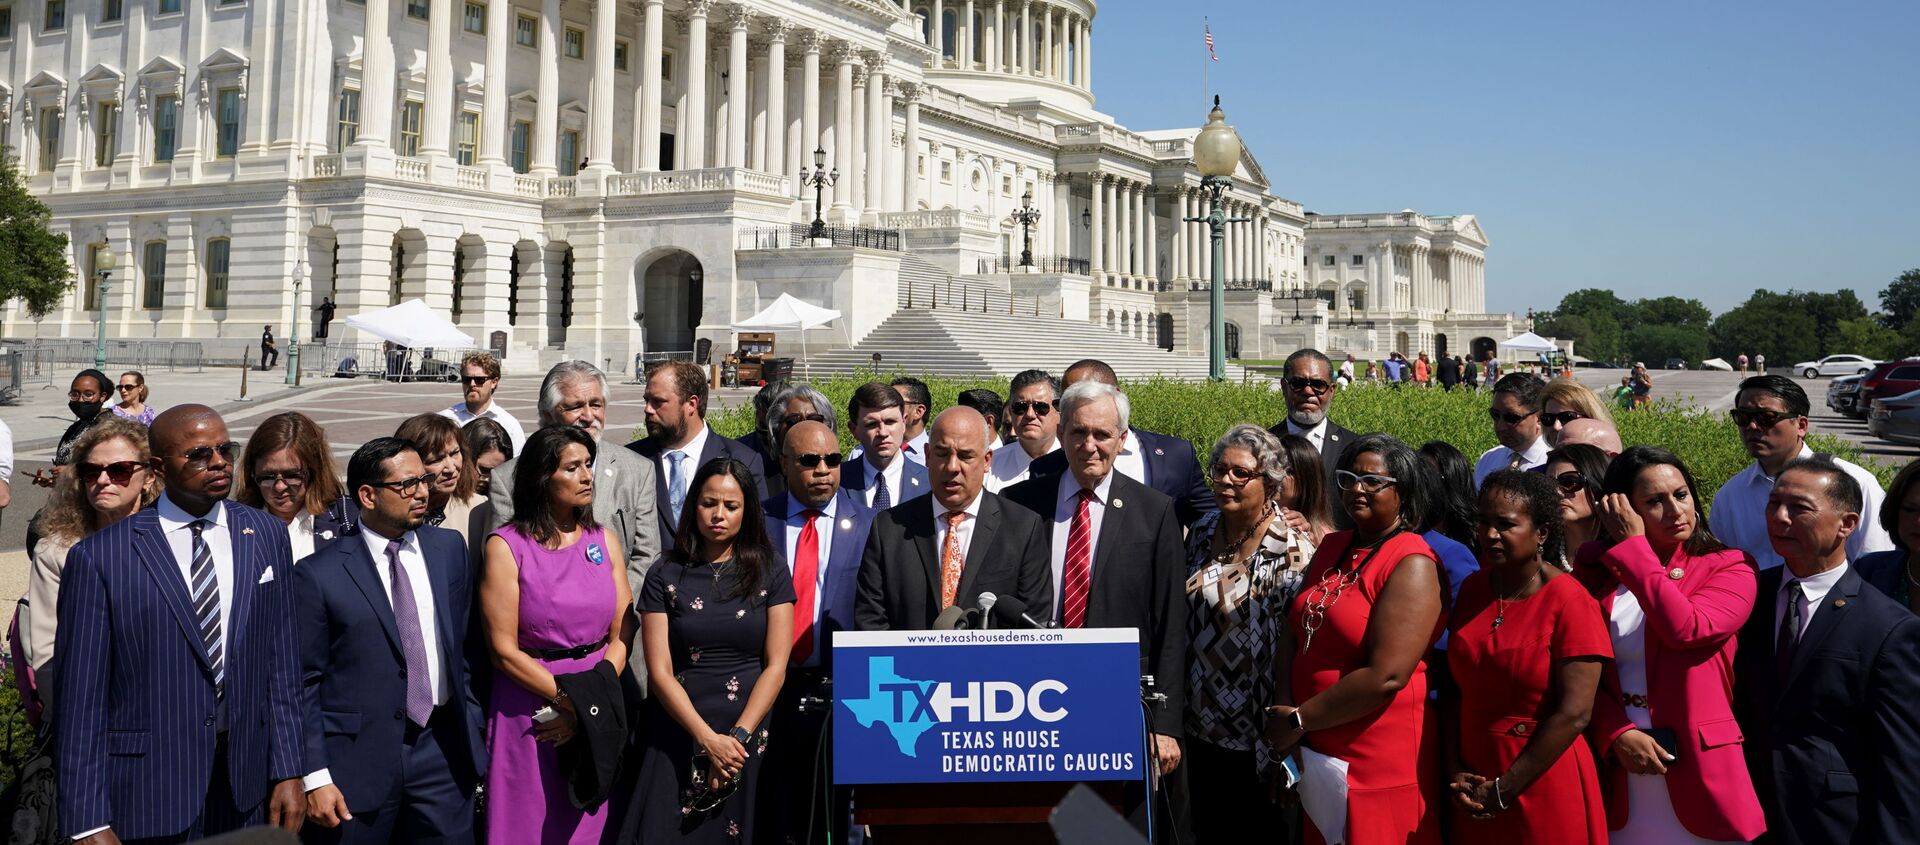 Representative Chris Turner (D-TX) joins other Democratic members of the Texas House of Representatives, who are boycotting a special session of the legislature in an effort to block Republican-backed voting restrictions, as they speak in front of the U.S. Capitol in Washington, U.S., July 13, 2021 - Sputnik International, 1920, 11.08.2021